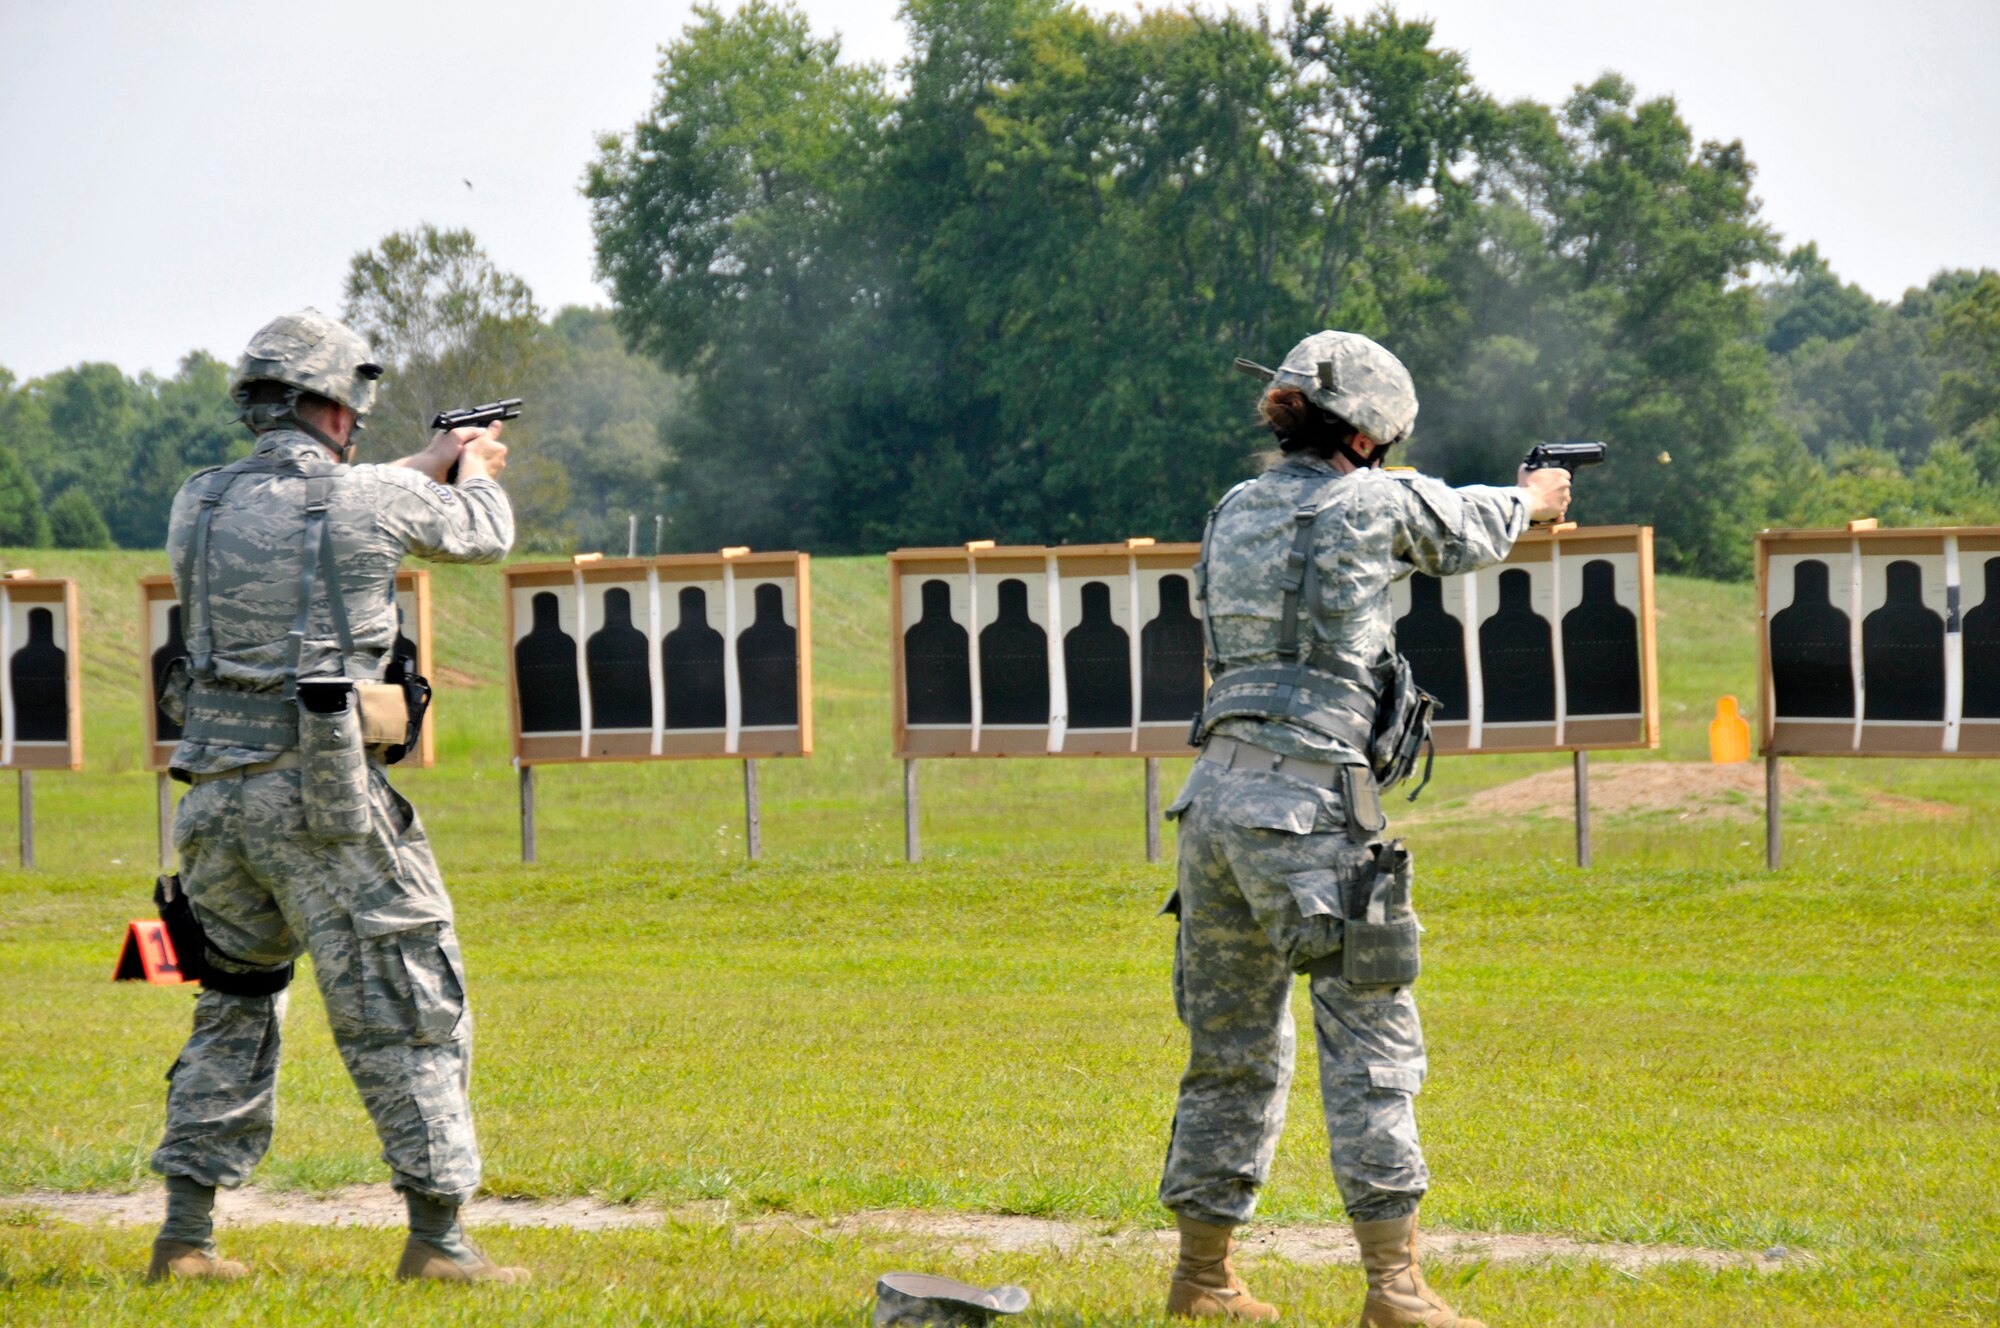 Members of the Tennessee Army and Air National Guard hone their shooting skills with a Beretta M9 service pistol during a training session at the 2014 Tennessee Adjutant General Marksmanship Pistol Match in Tullahoma, TN on Aug 16. The Tennesee TAG Match is held anually to promote marksmanship skills in the Army and Air National Guard.  (U.S. Air National Guard photo by Master Sgt. Kendra M. Owenby, 134 ARW Public Affairs)